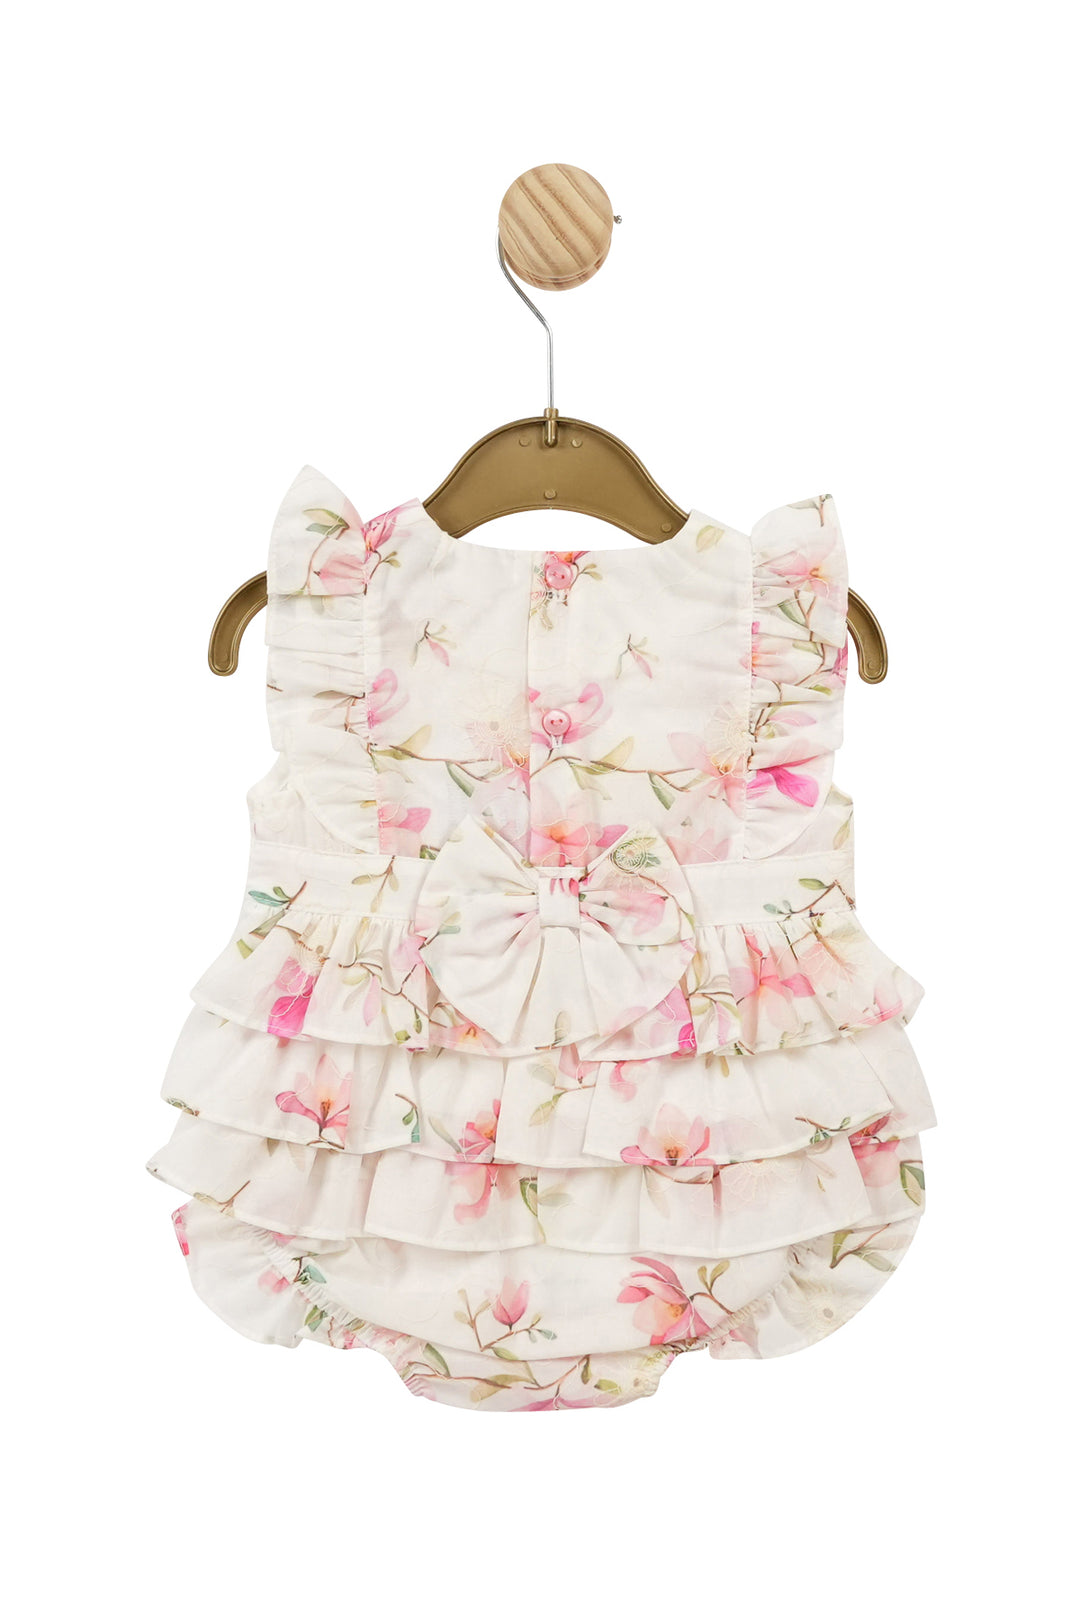 Mintini Baby "Alice" White & Pink Floral Shortie | Millie and John